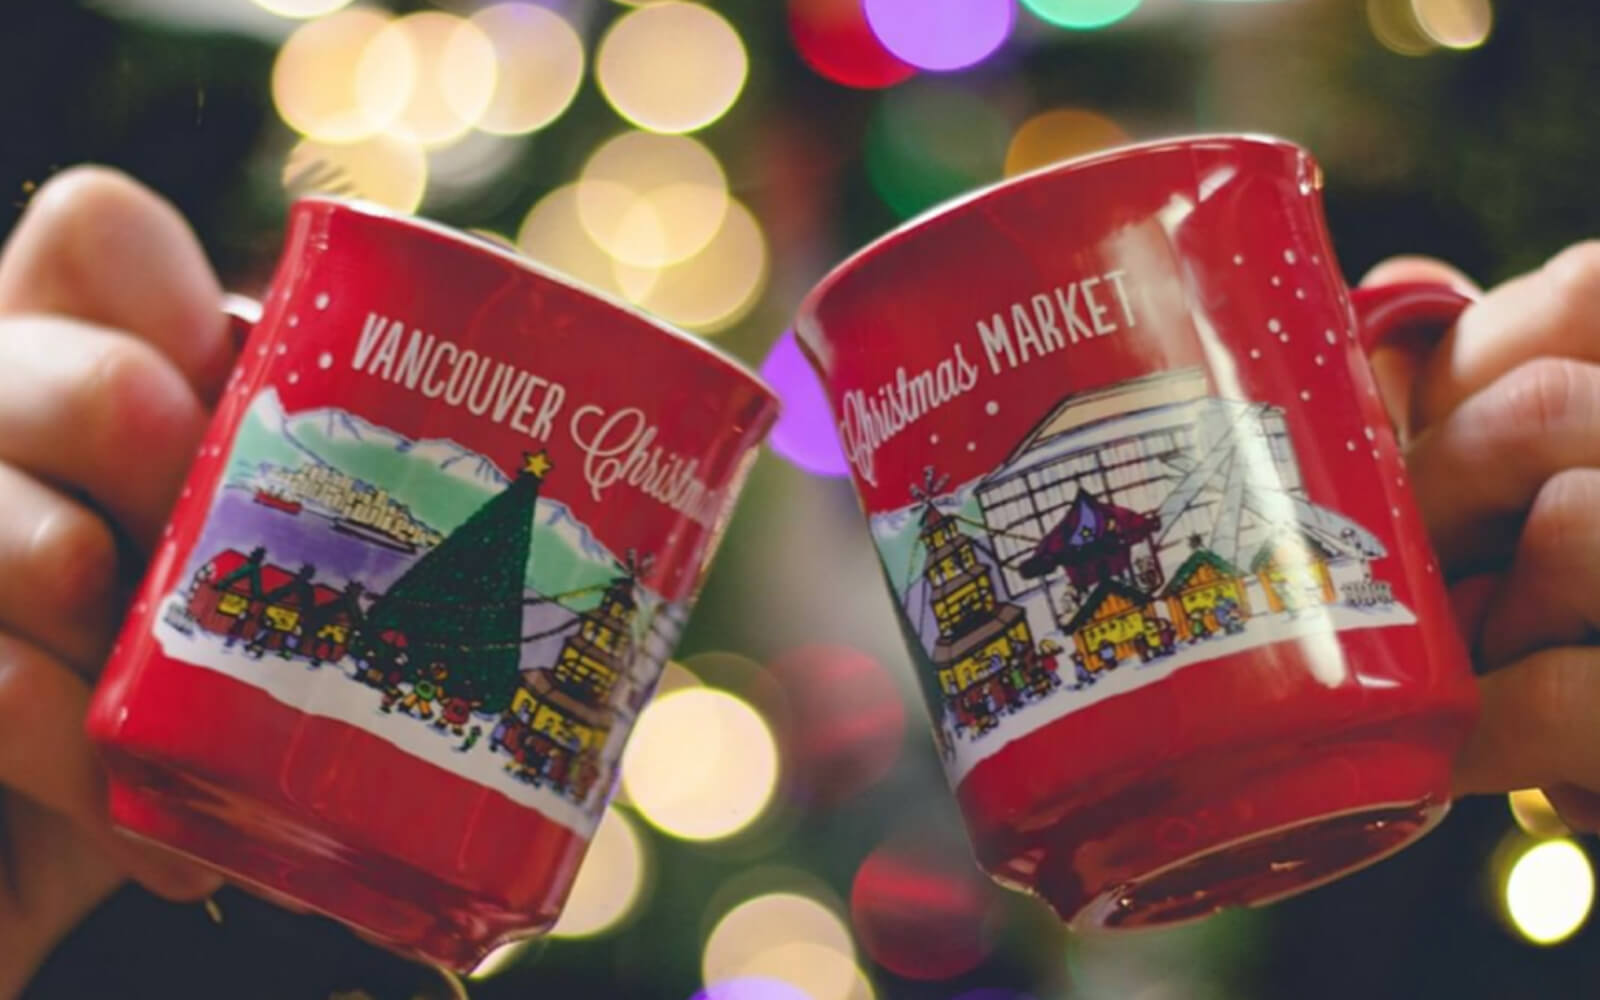 WELCOME TO THE 2019 VANCOUVER CHRISTMAS MARKET